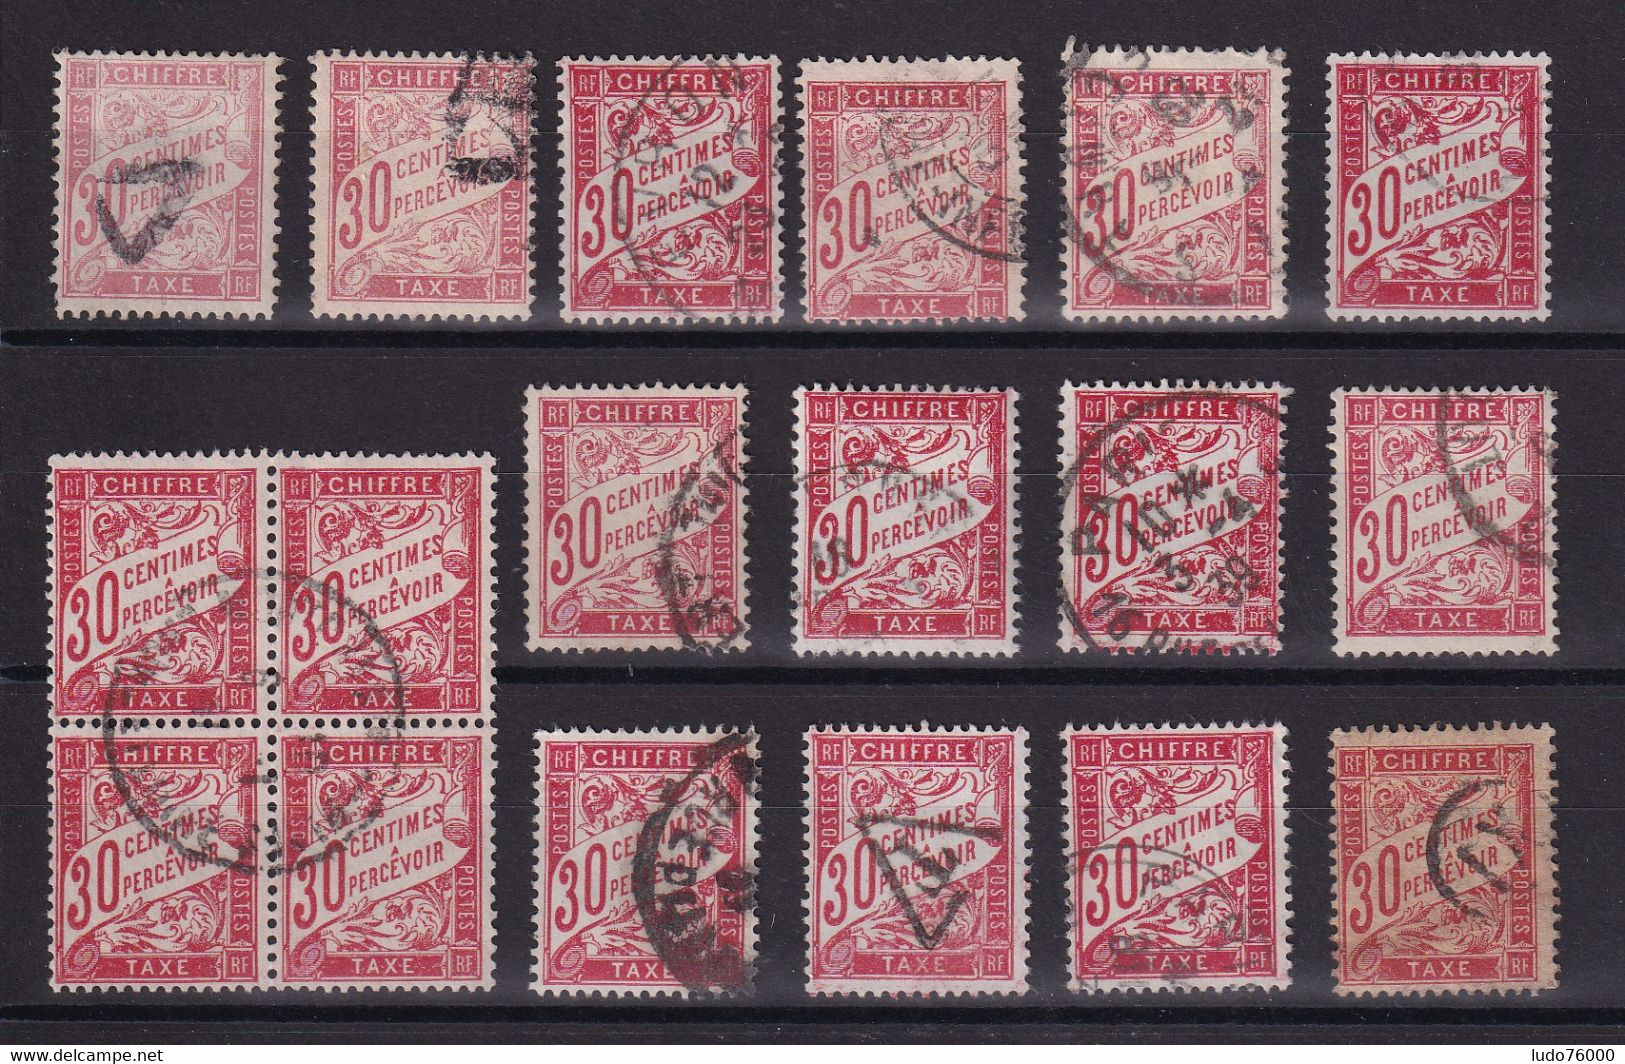 D 358 / TAXE / LOT N° 33 OBL - Collections